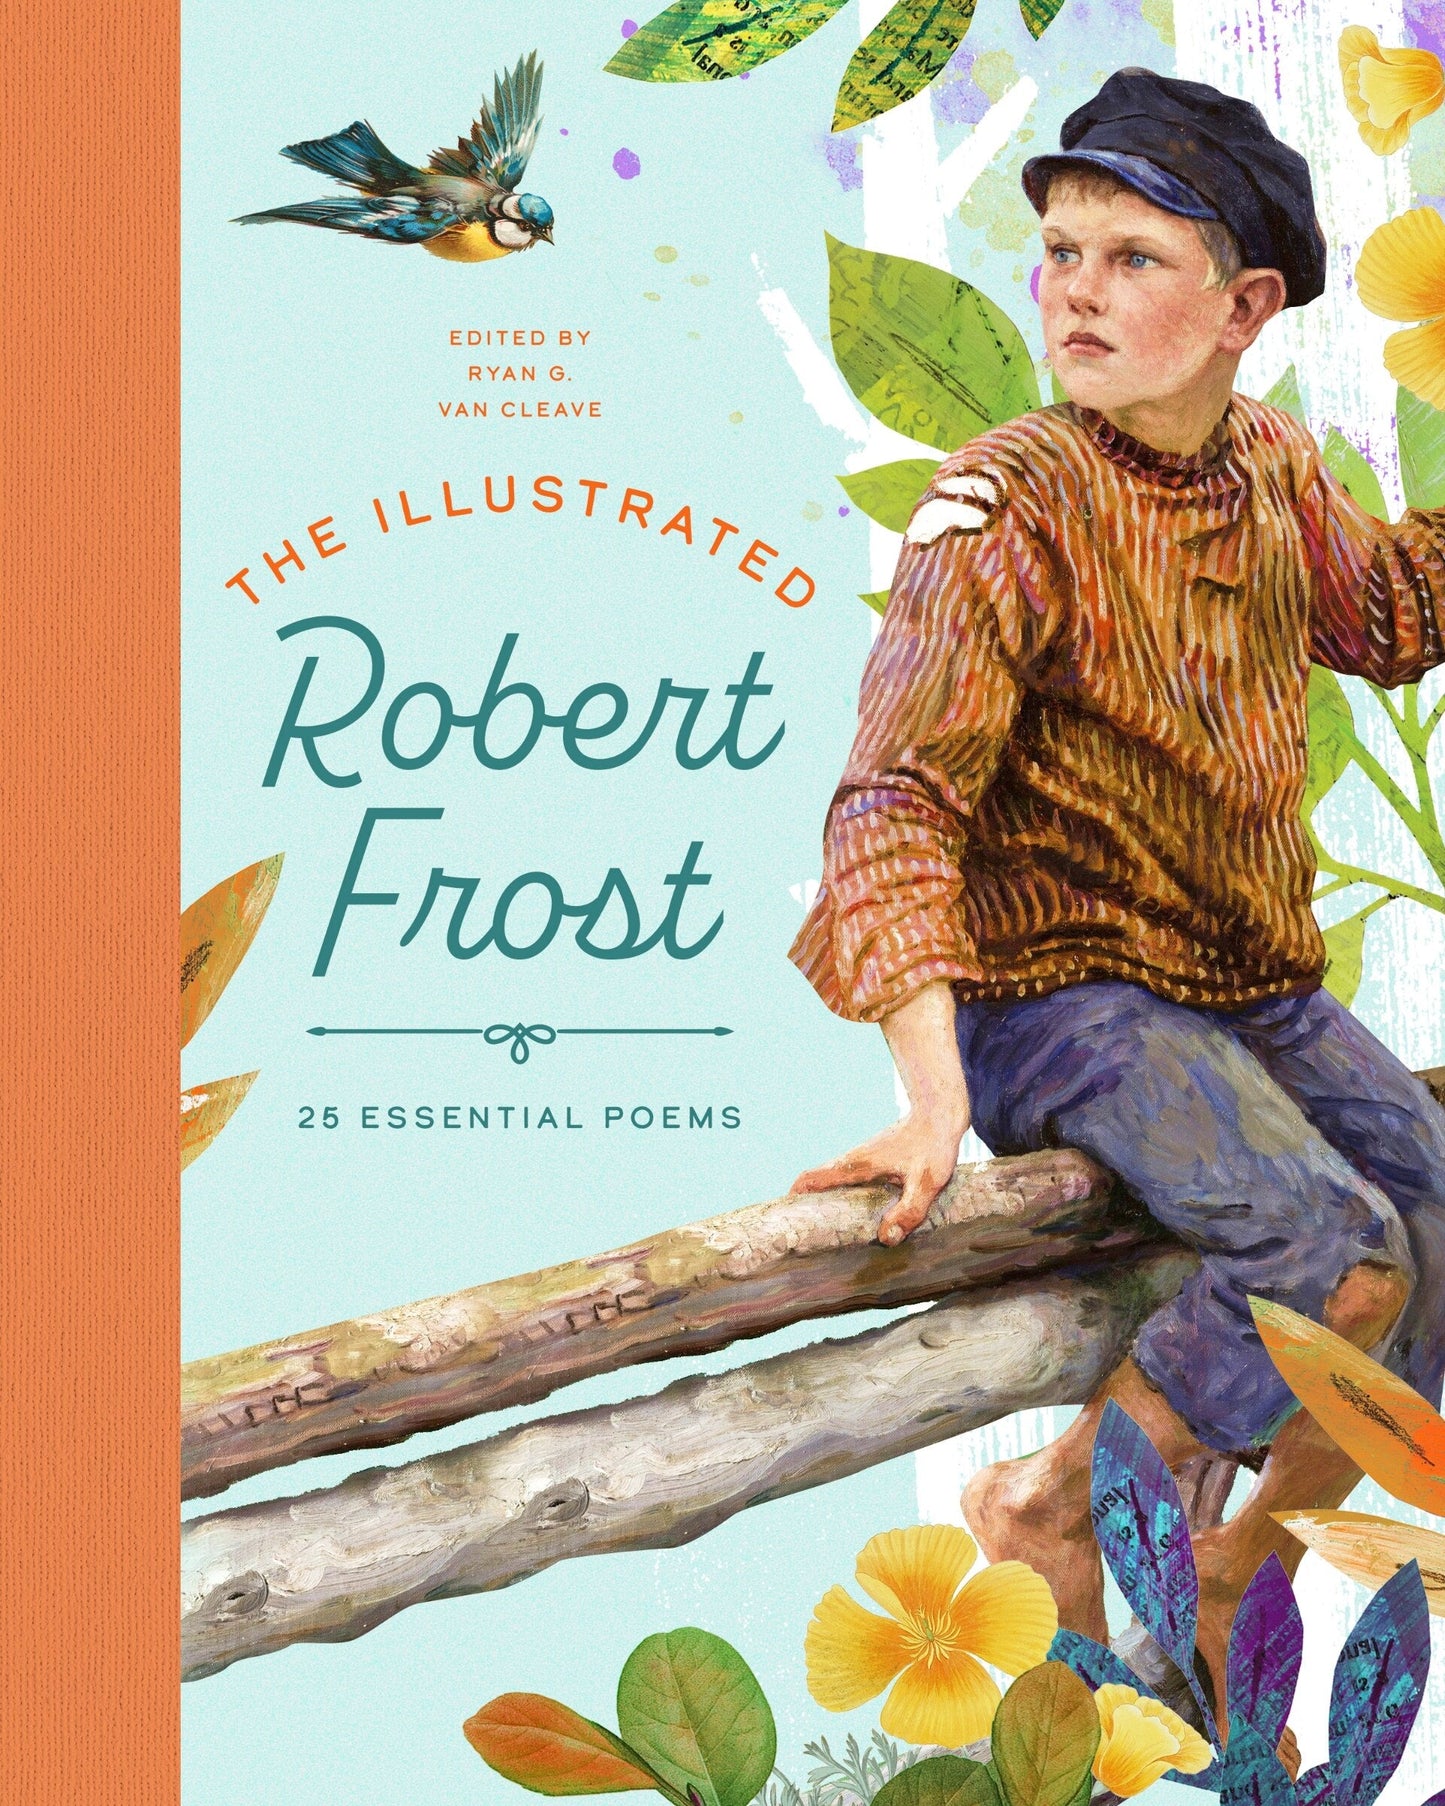 The Illustrated Robert Frost: 25 Essential Poems - Van Cleave, Ryan G. (Hardcover)-Children's Books/Ages 9-12 Nonfiction-9781638191063-BookBizCanada